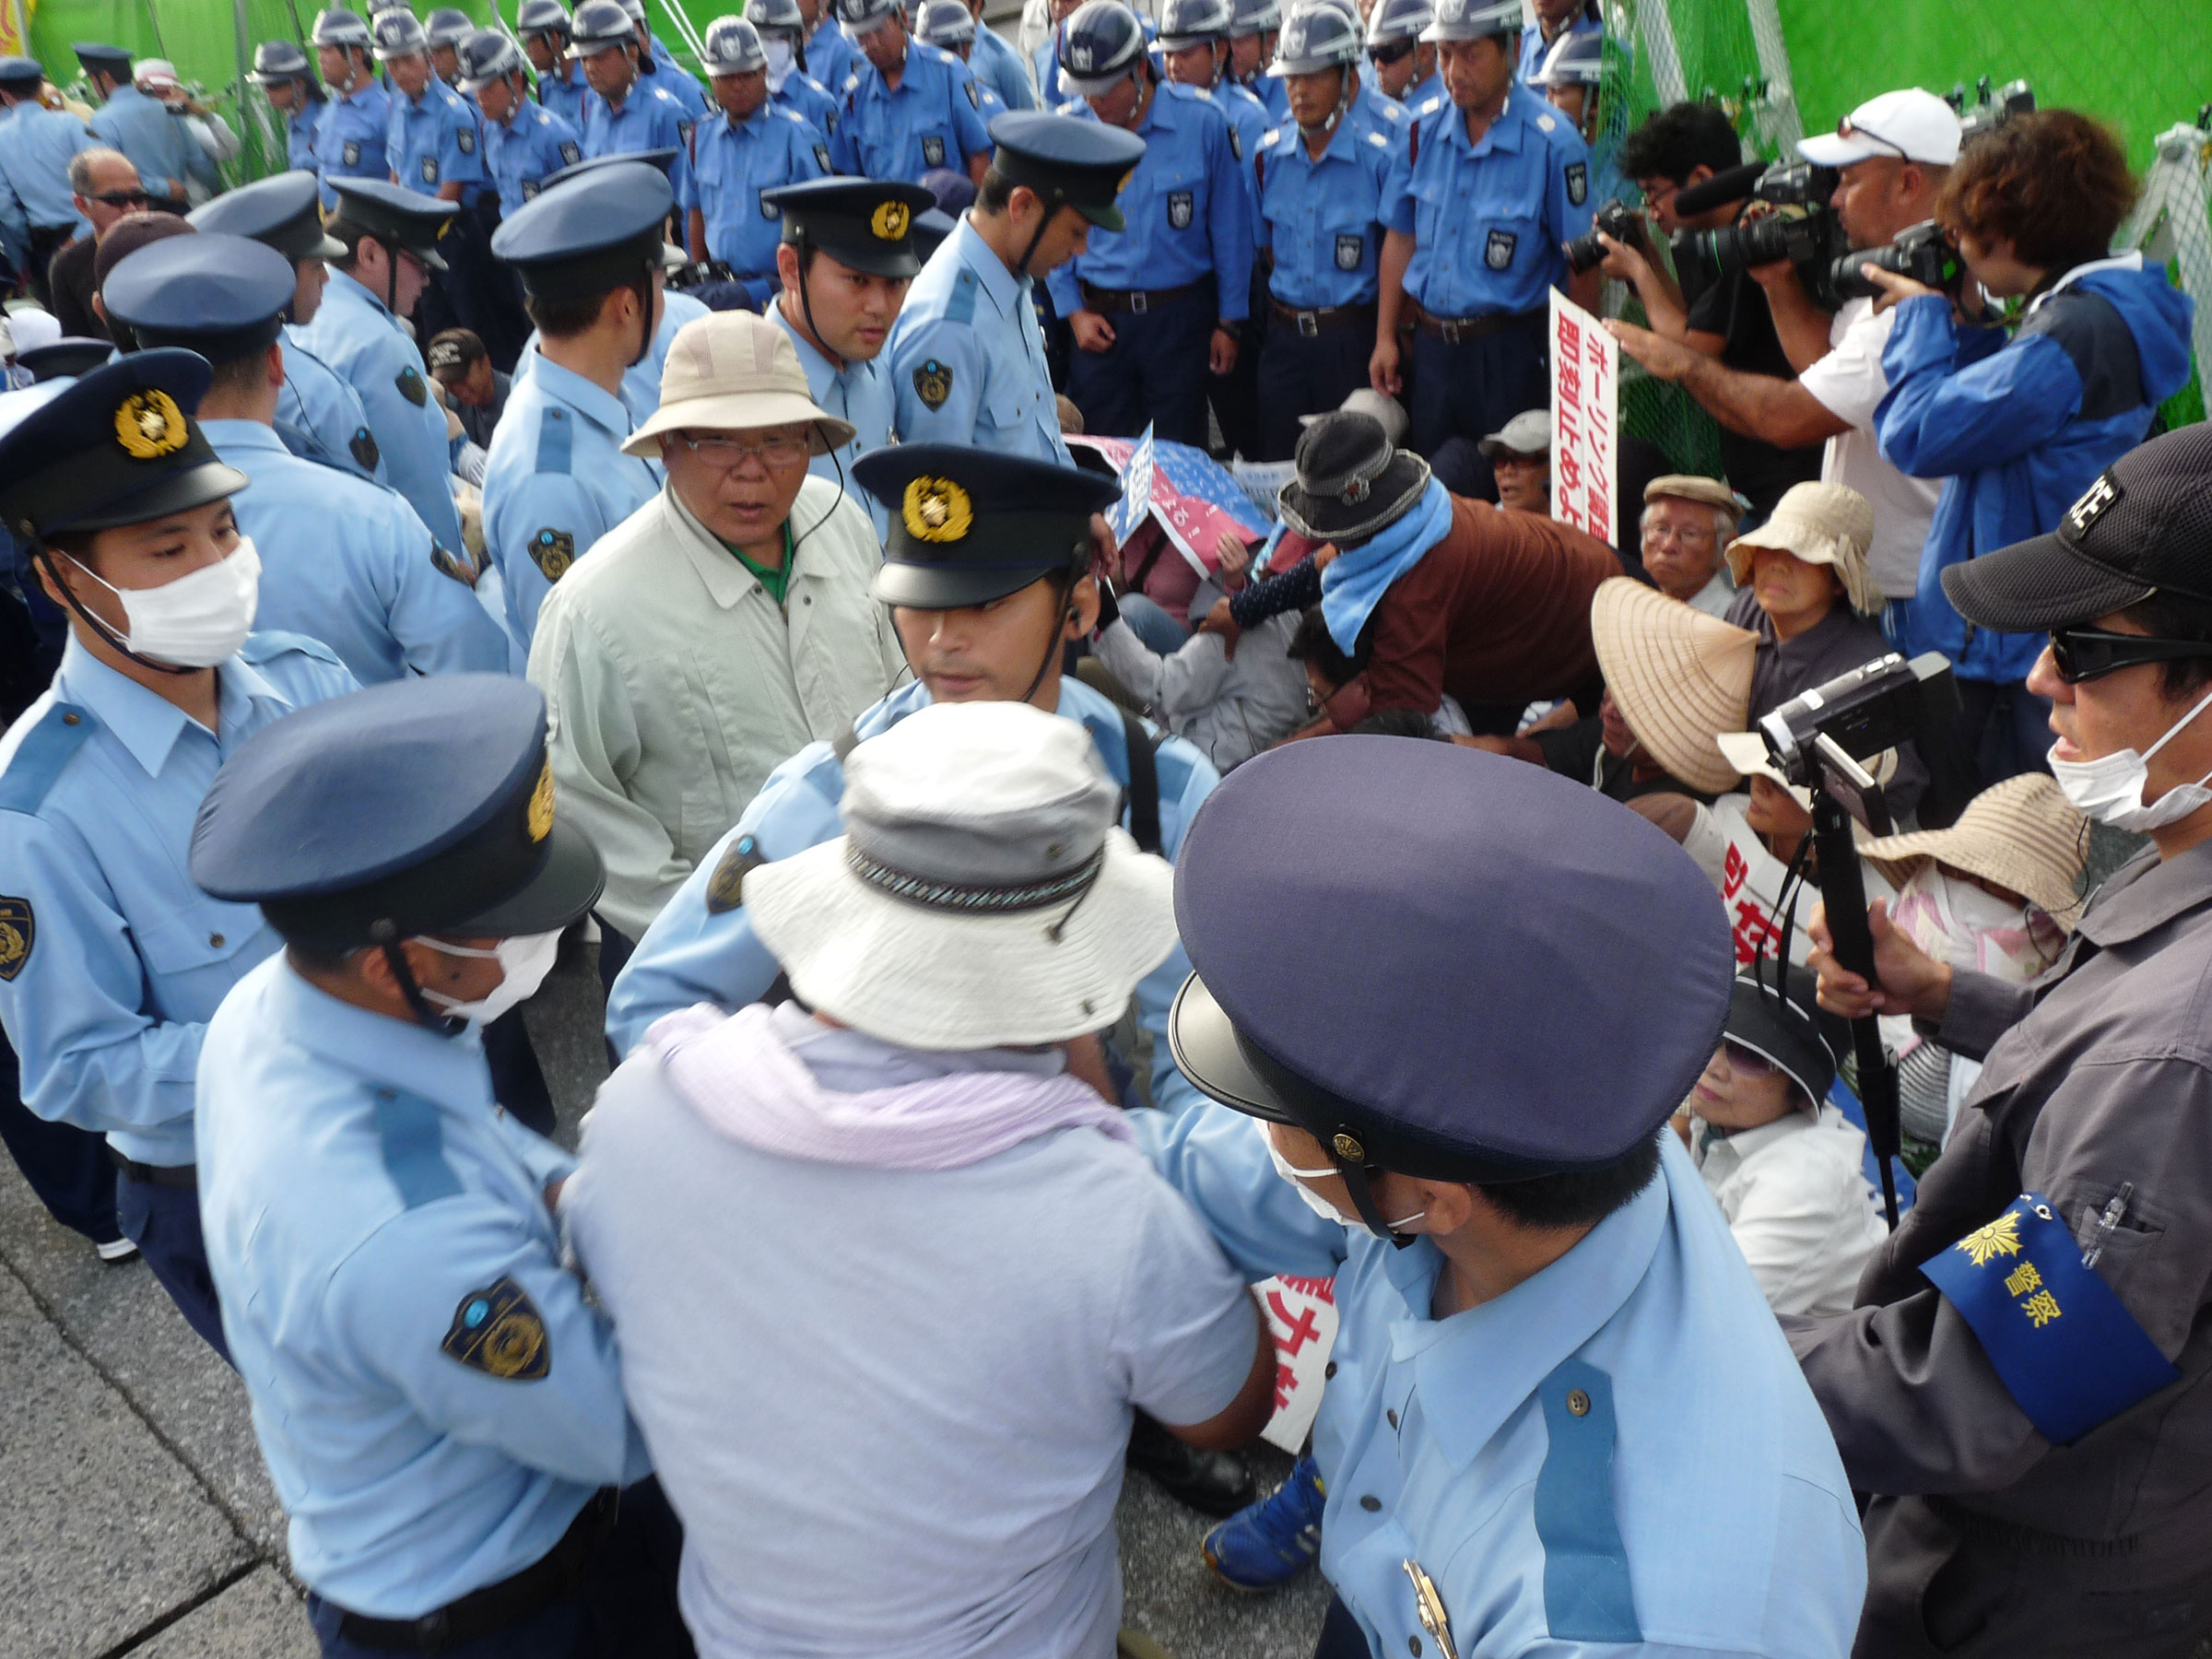 Protesters, many of them elders in their 70s and 80s, face off with police and security forces almost daily at Henoko on Okinawa island.